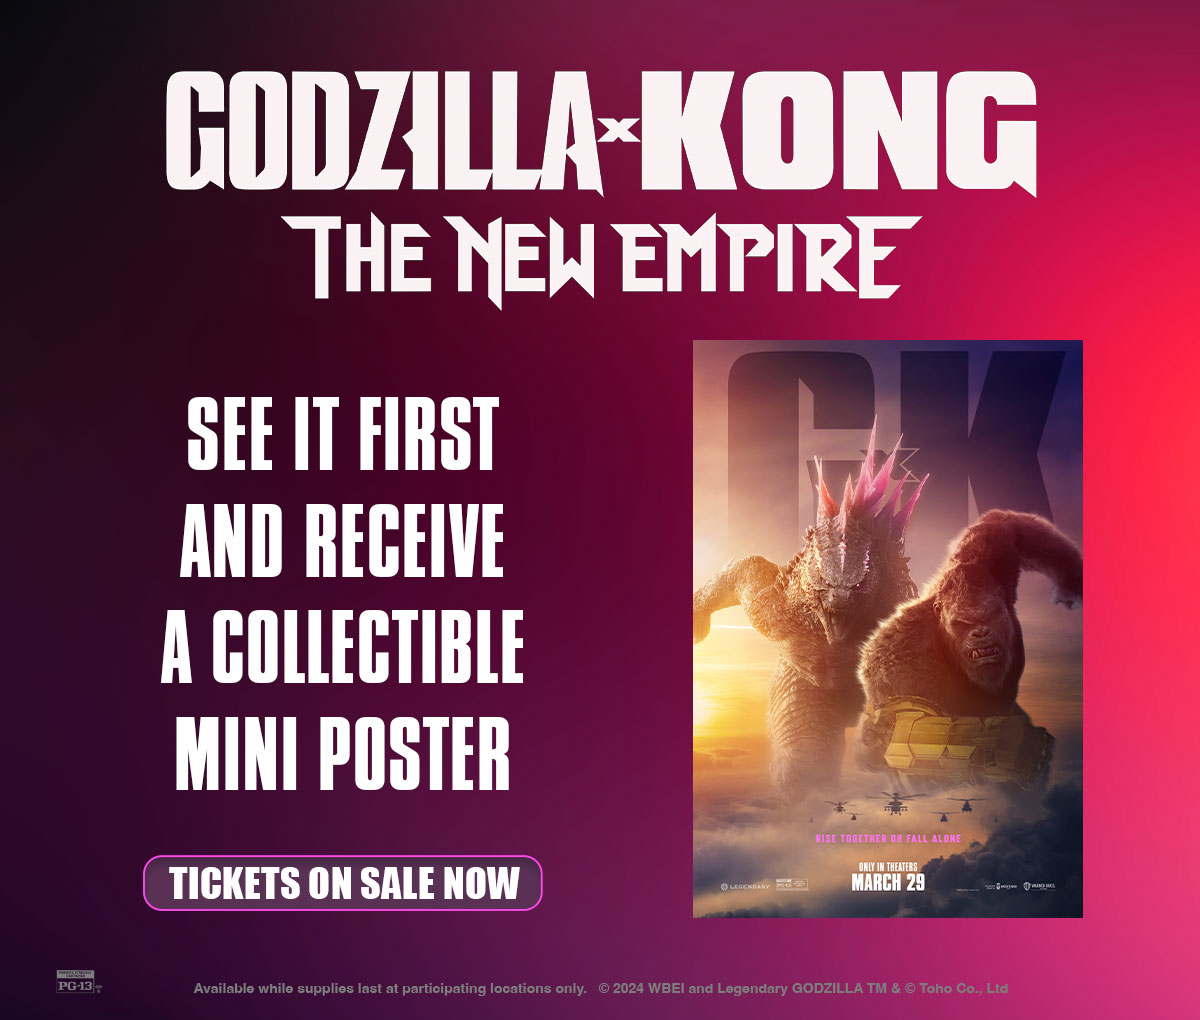 Be among the first to witness the epic clash! 🎬🦍🔥 See Godzilla vs. Kong: The New Empire and score a free mini poster with your ticket! Don't miss out on this monstrous offer! #GodzillavsKong *Available for a limited time while supplies last*